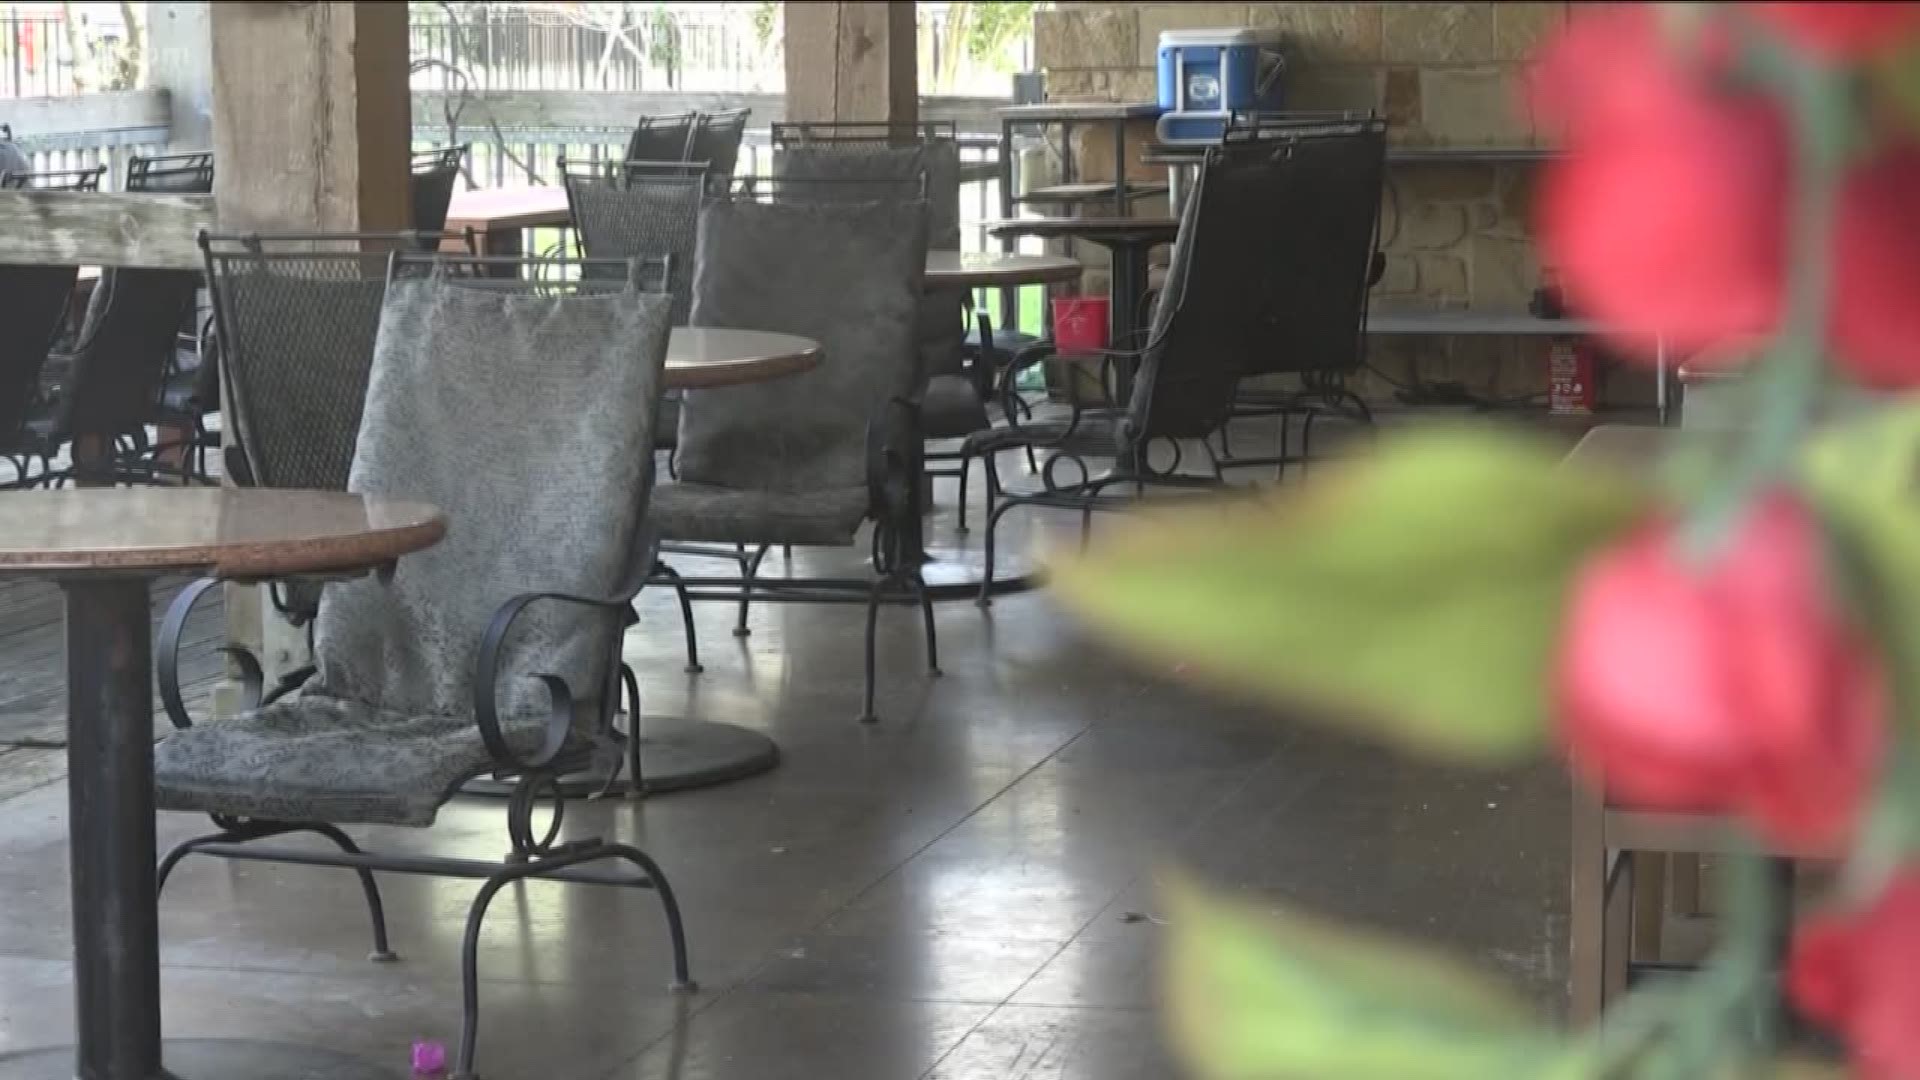 Luis De Leon took a look at how dining out will change under Gov. Abbott's new order.